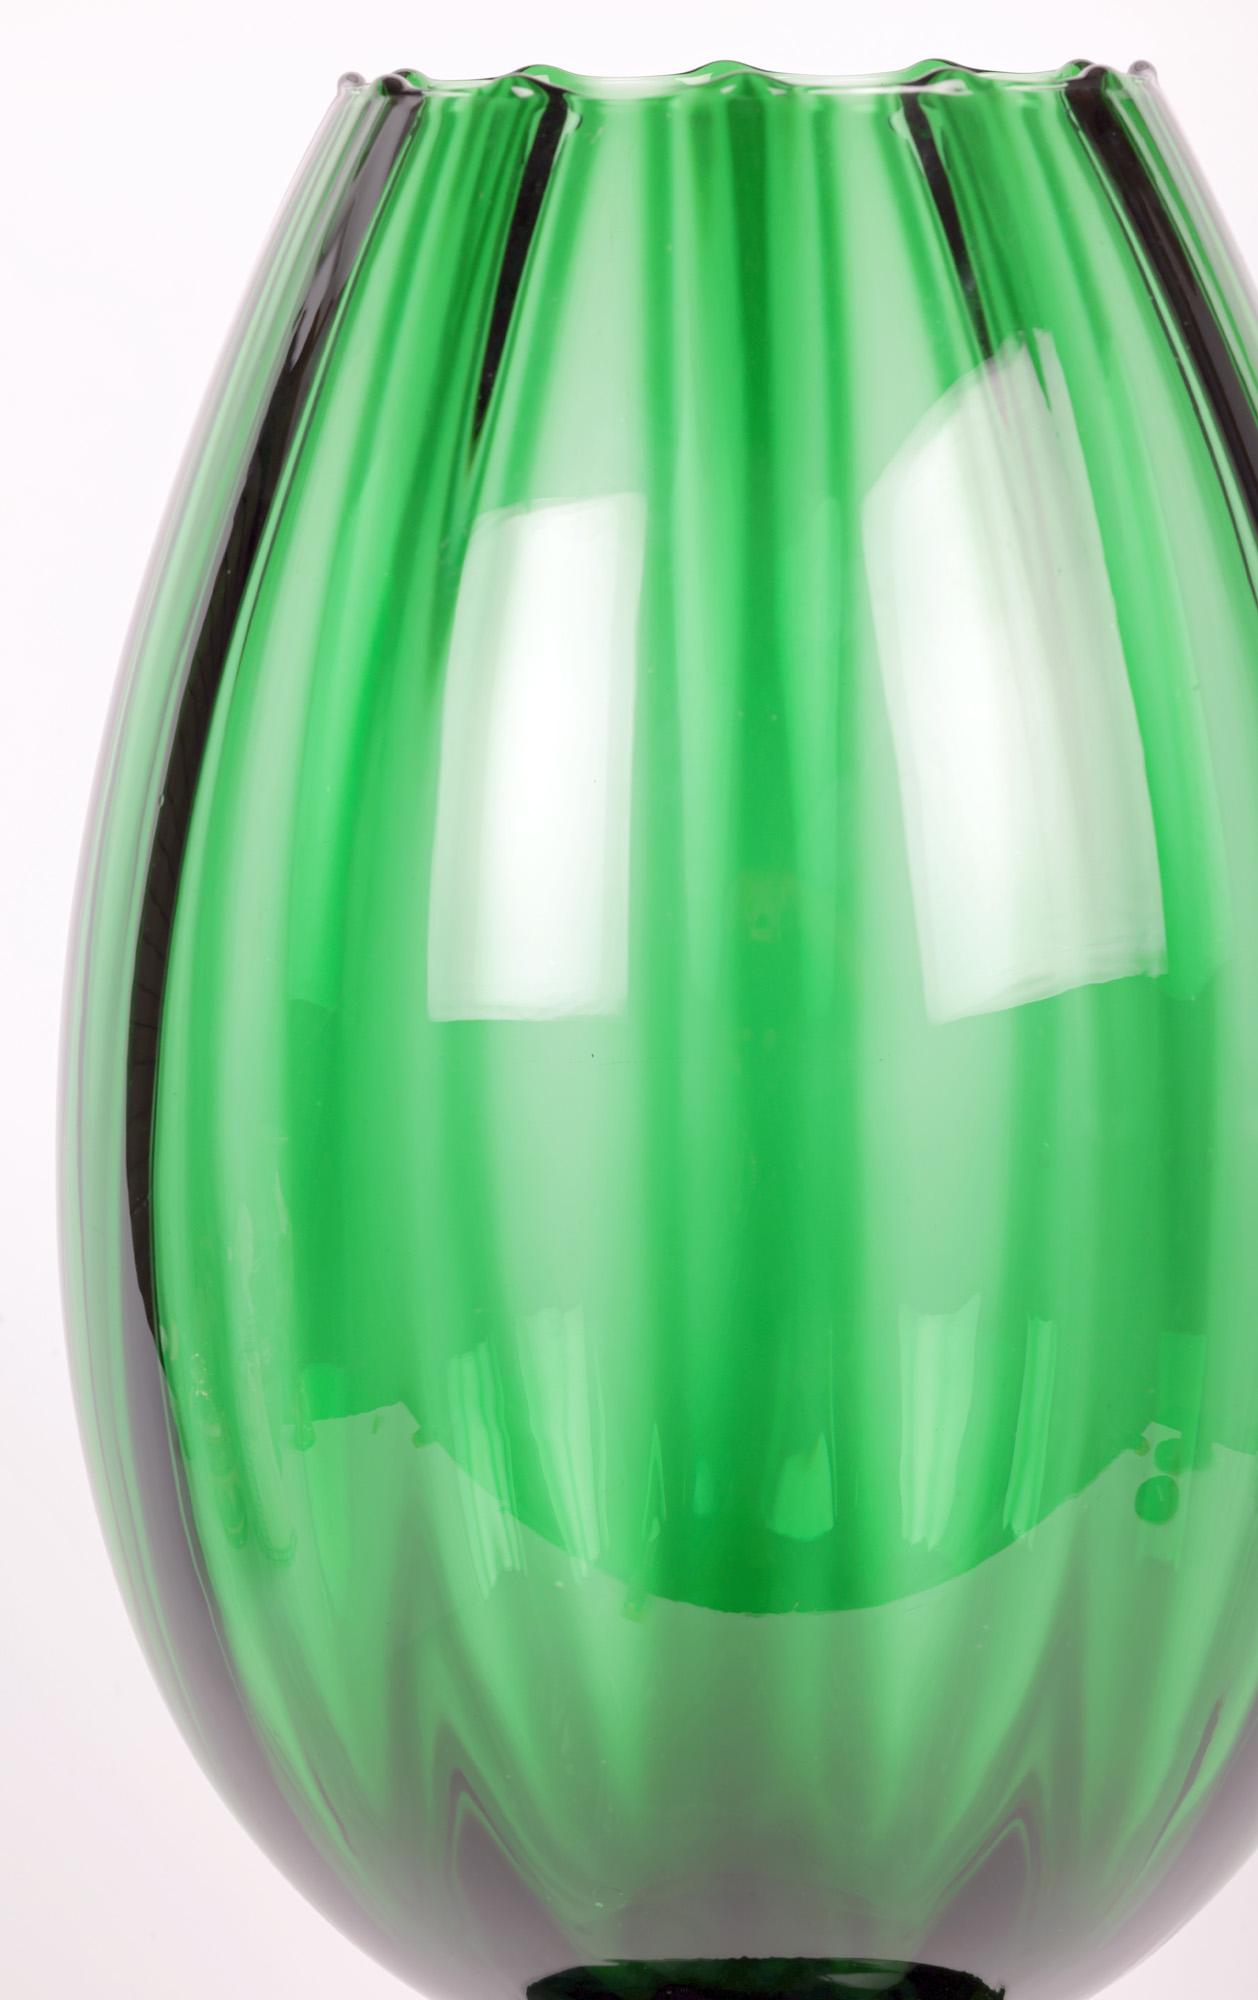 A large and impressive mid-century hand-blown Italian art glass green pedestal goblet shaped vase by renowned glass makers Empoli and dating from around 1960/70. The vase has a tall bud shaped body with vertical grooved patterning forming small